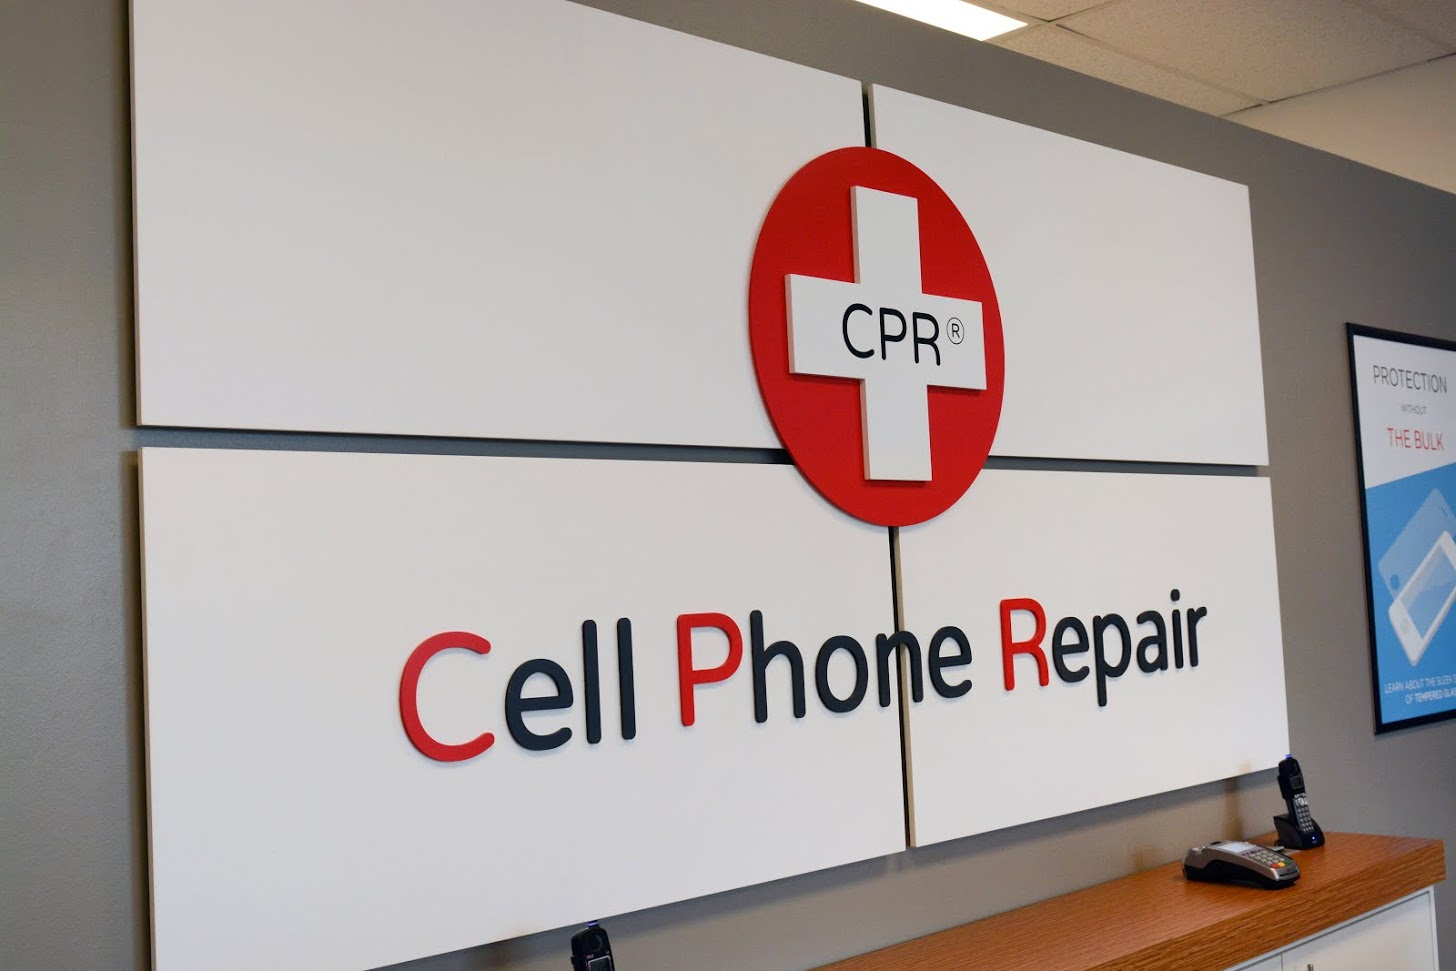 CPR Cell Phone Repair, Thursday, April 23, 2020, Press release picture